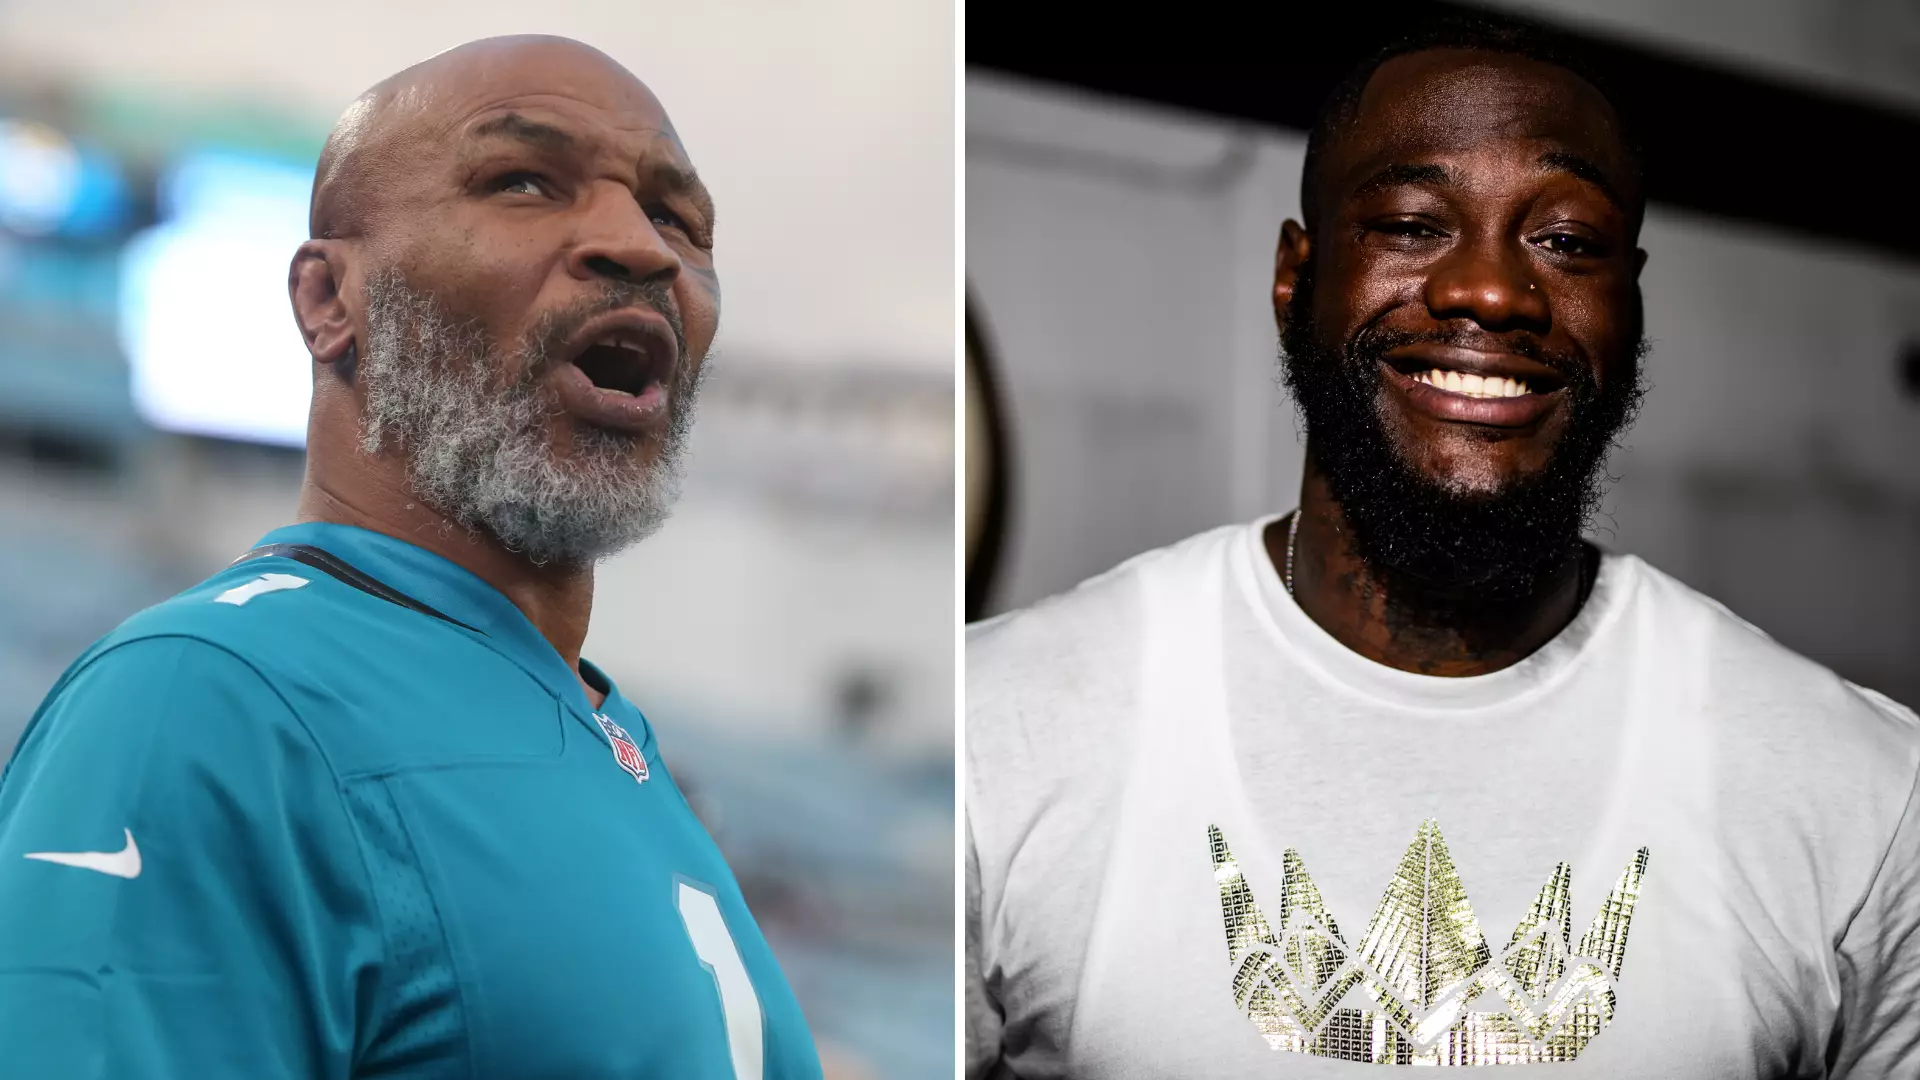 Mike Tyson 'Still Wants To Fight' And Would Destroy Deontay Wilder, Says Shannon Briggs